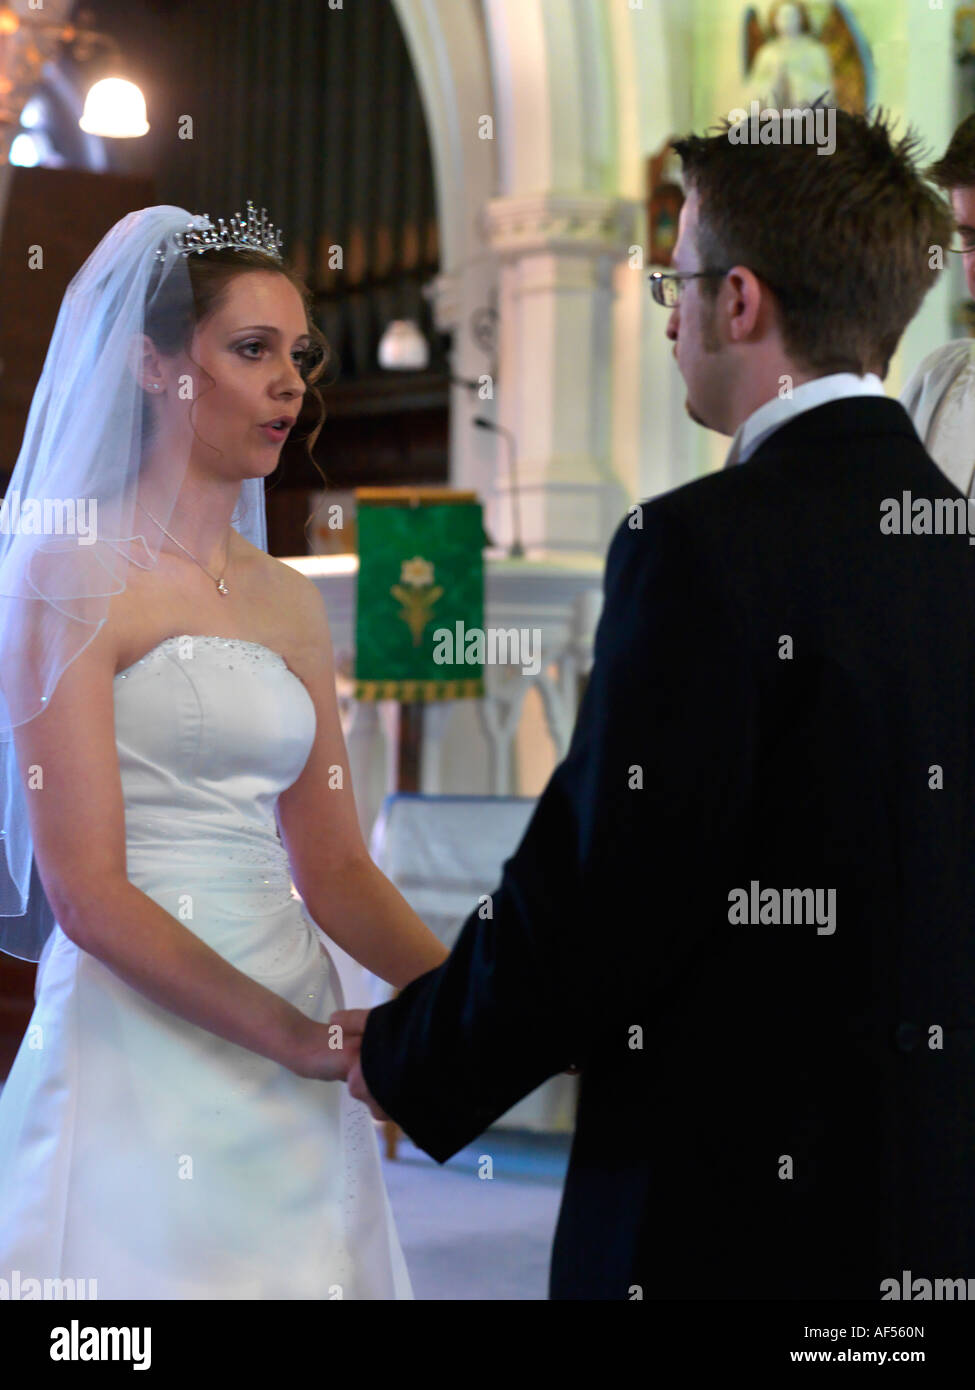 Bride & Groom Exchanging Vows During an Anglican Wedding Service Surrey England Stock Photo